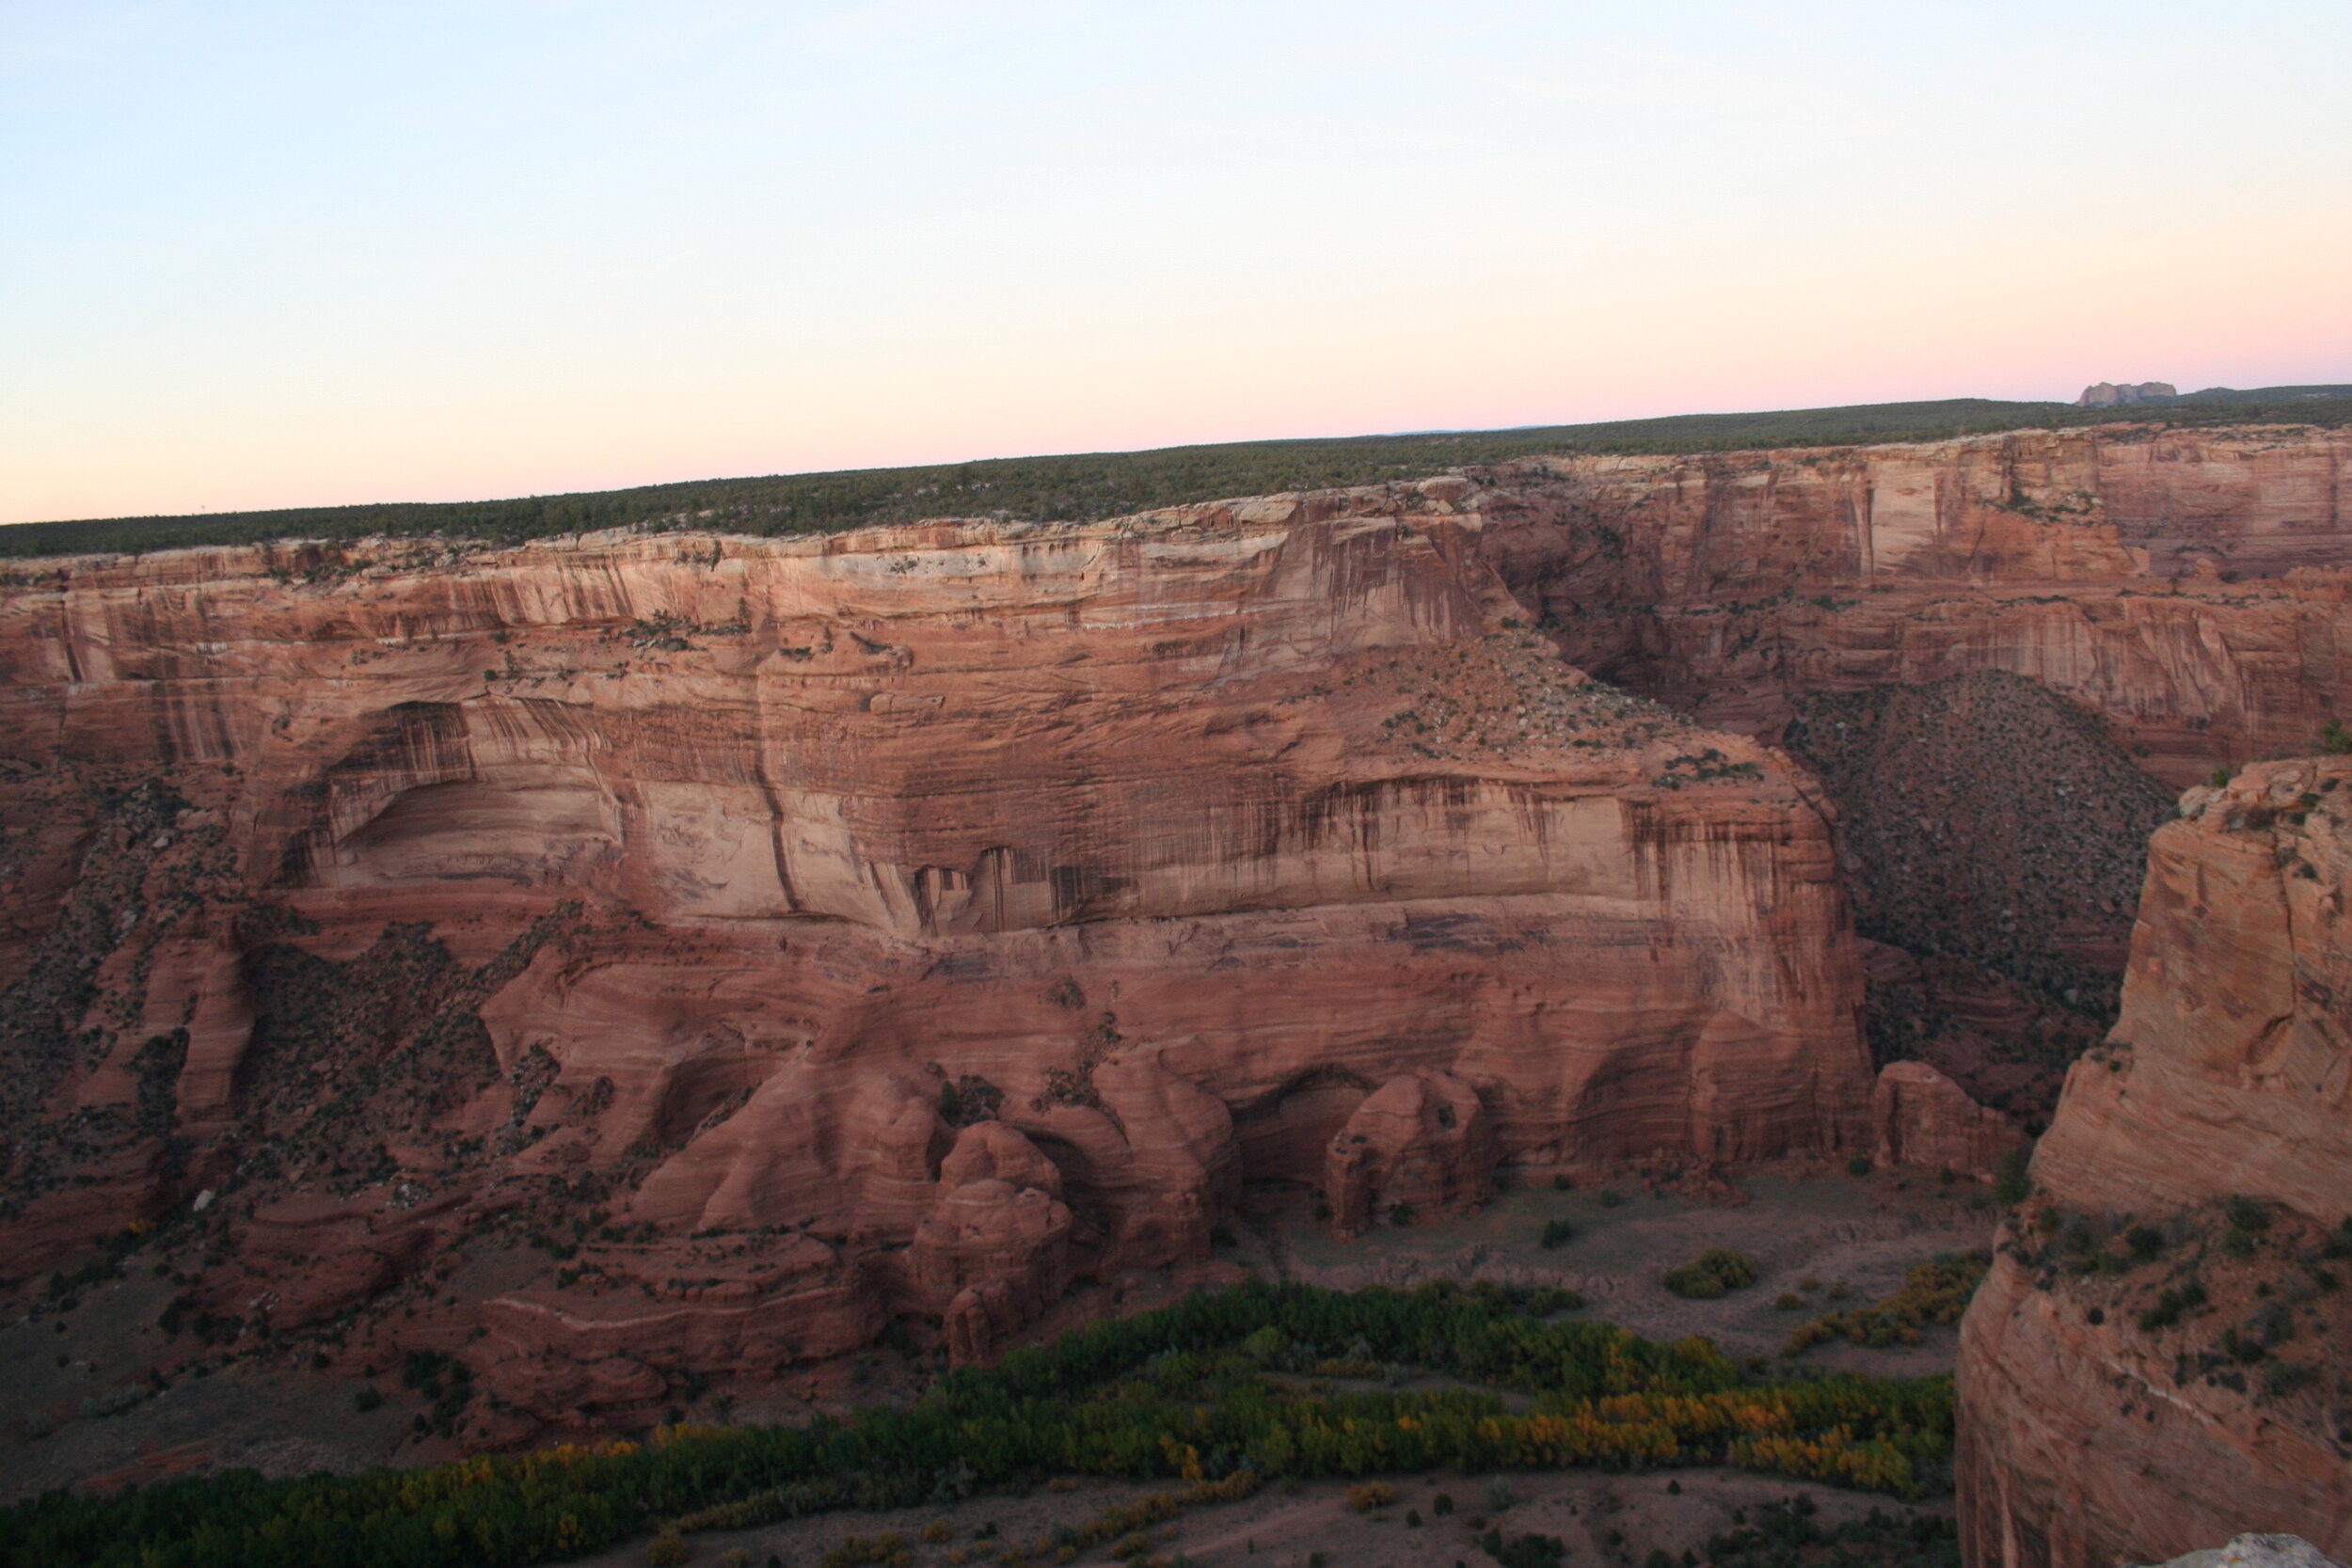   Sunset at Canyon de Chelly.  